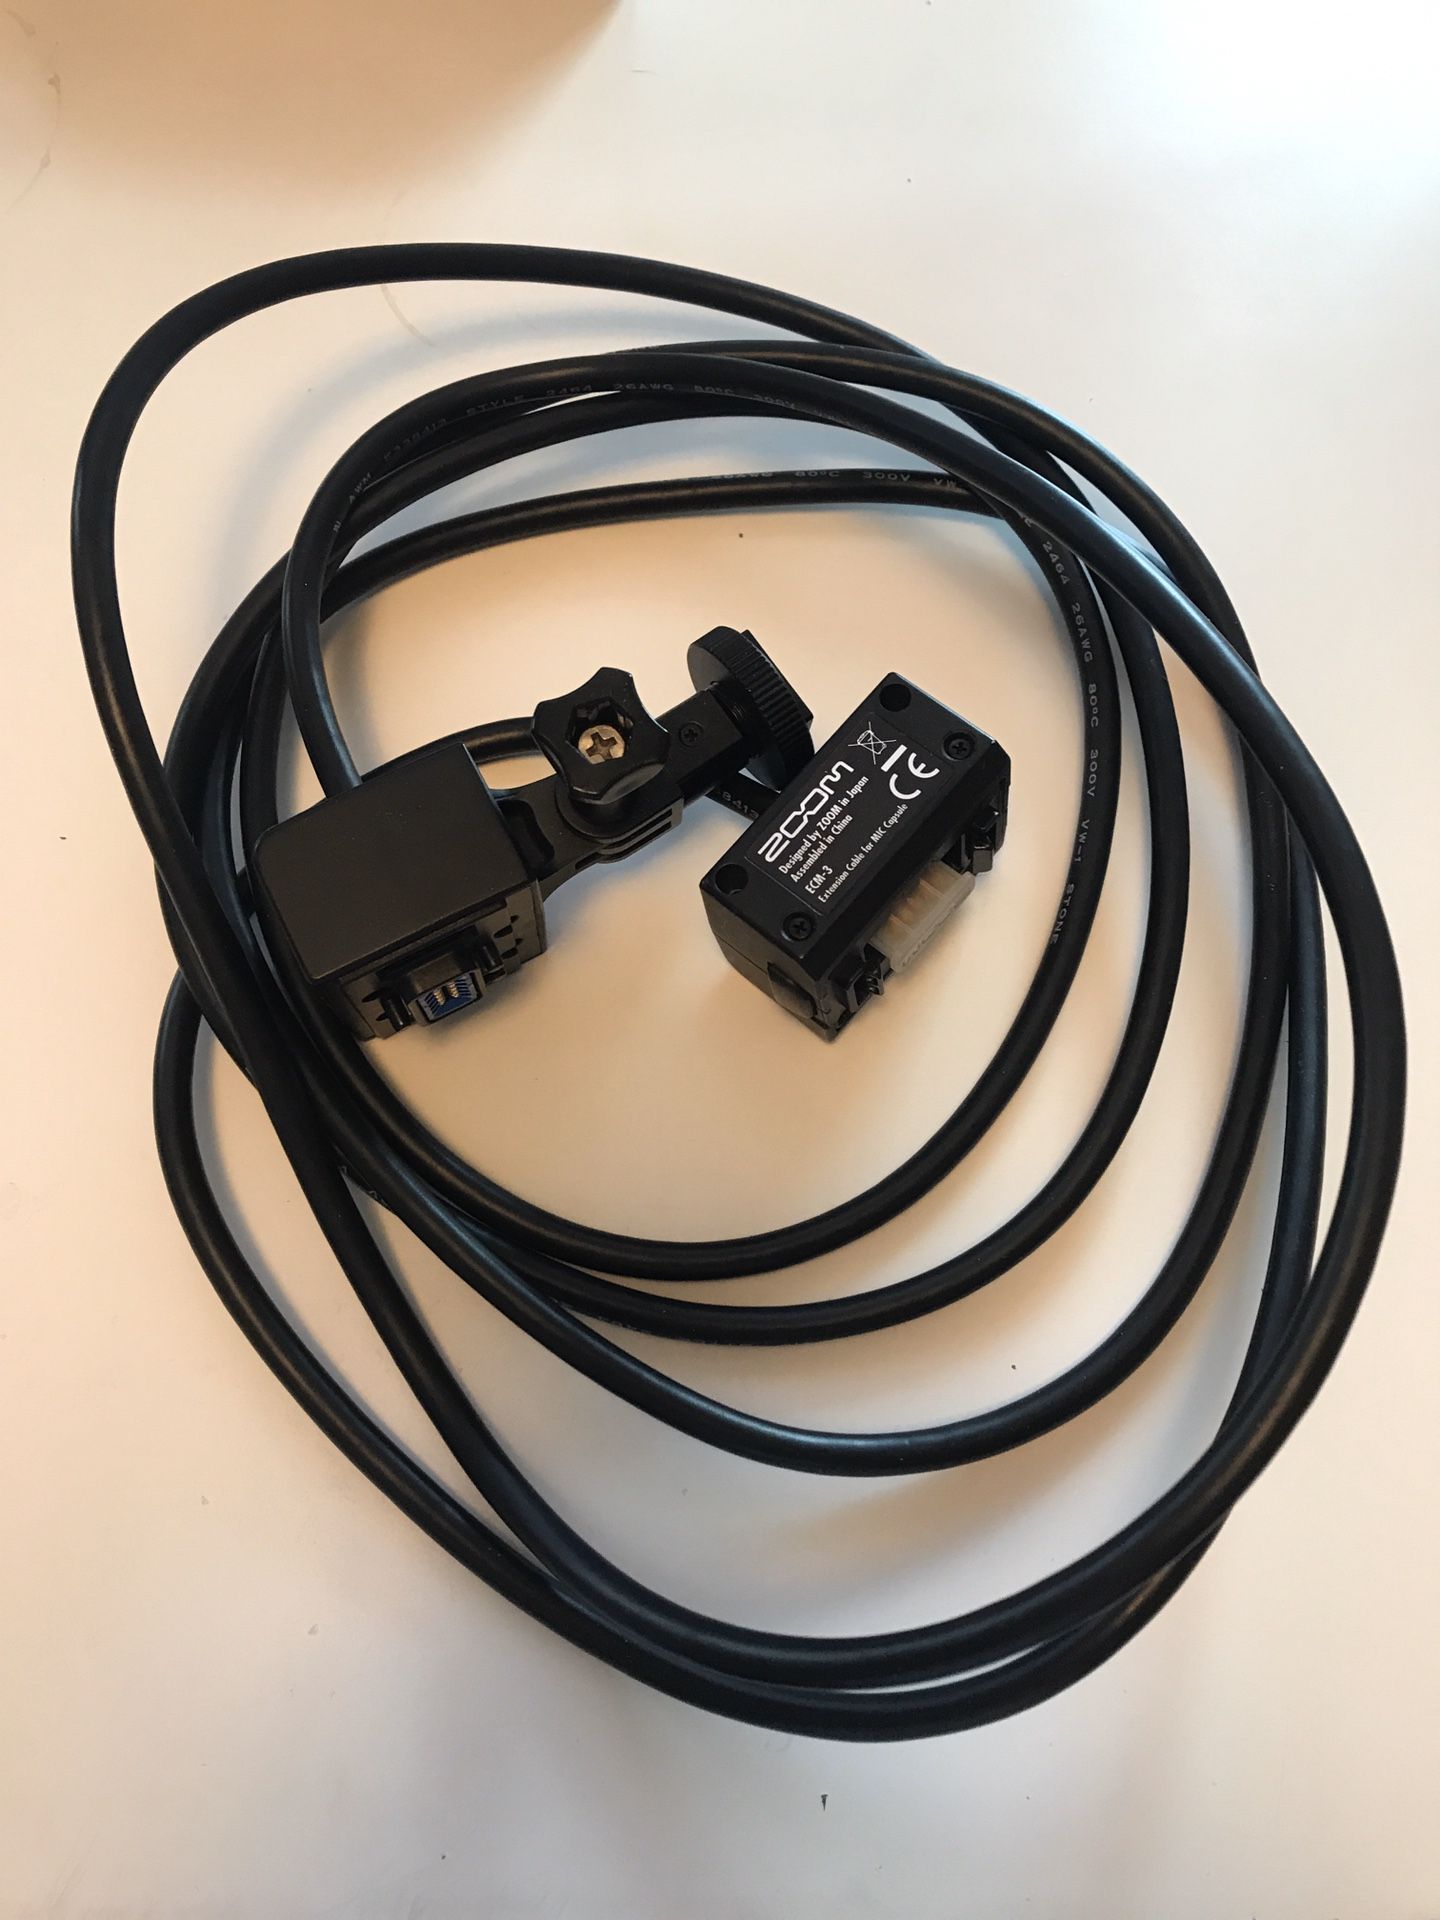 ZOOM ECM-3 Extension Cable with Action Camera Extension